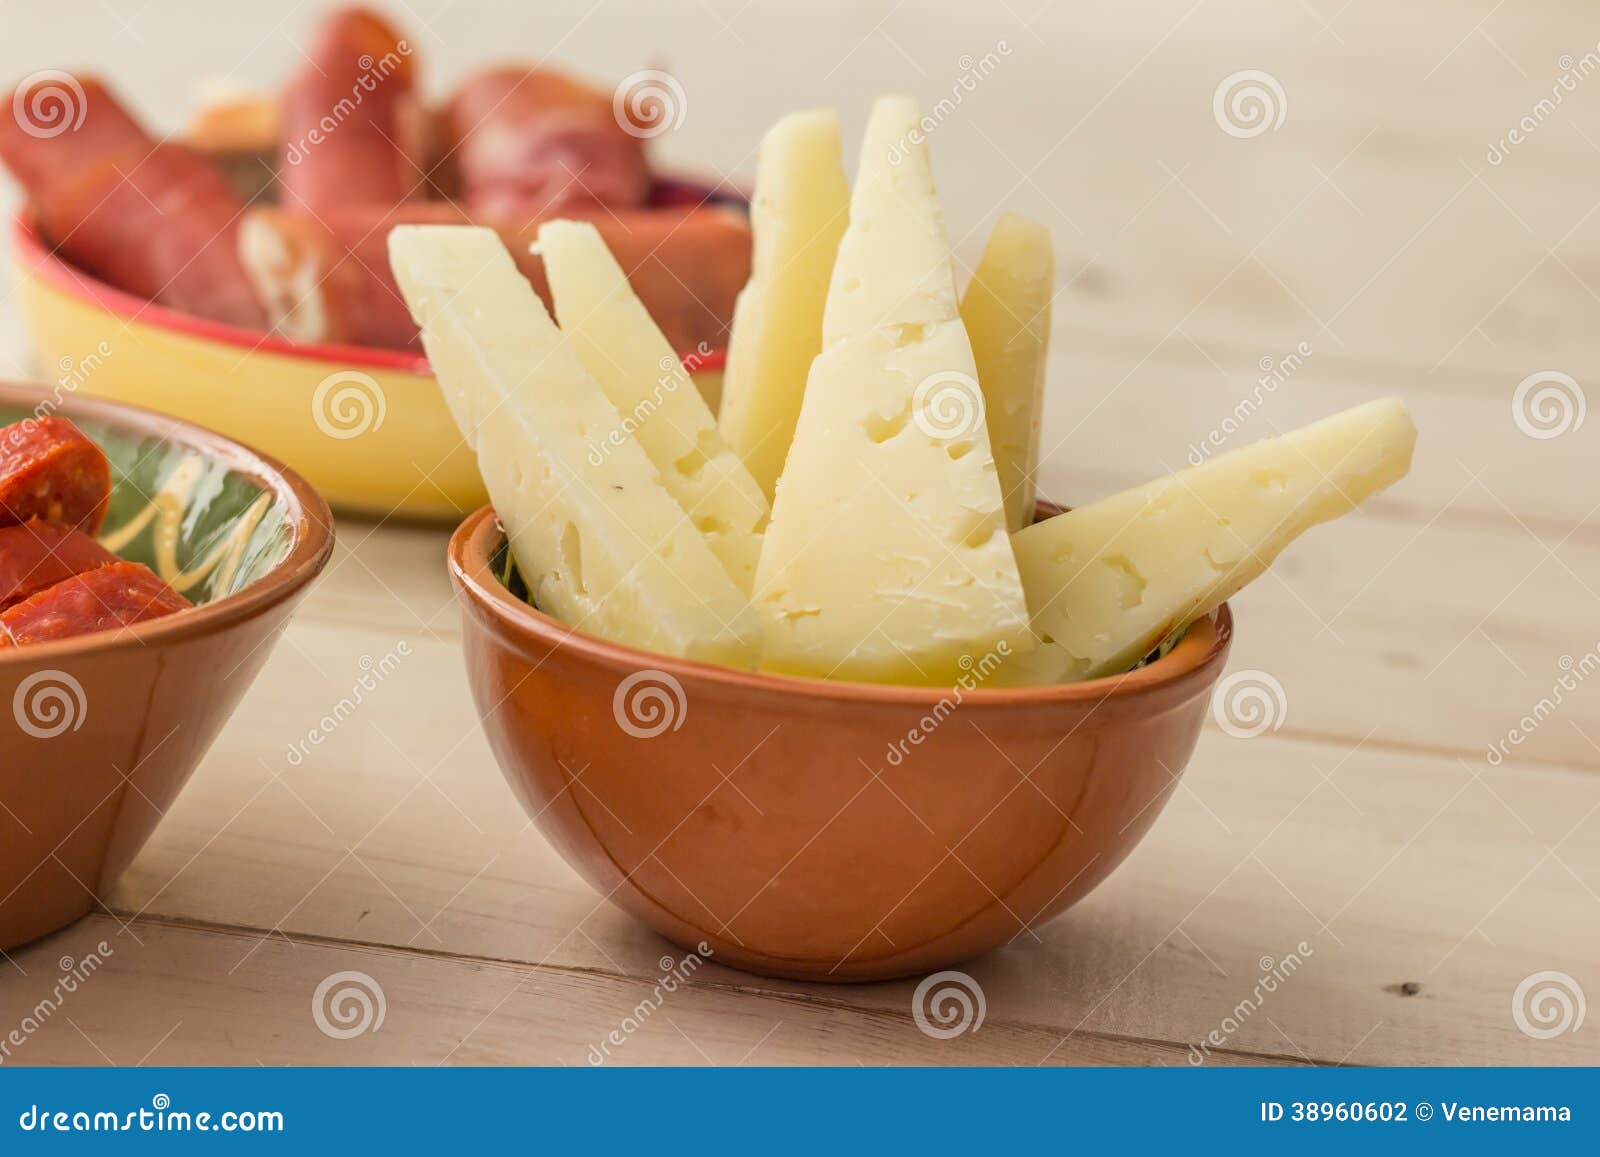 tapas, manchego cheese and cured ham